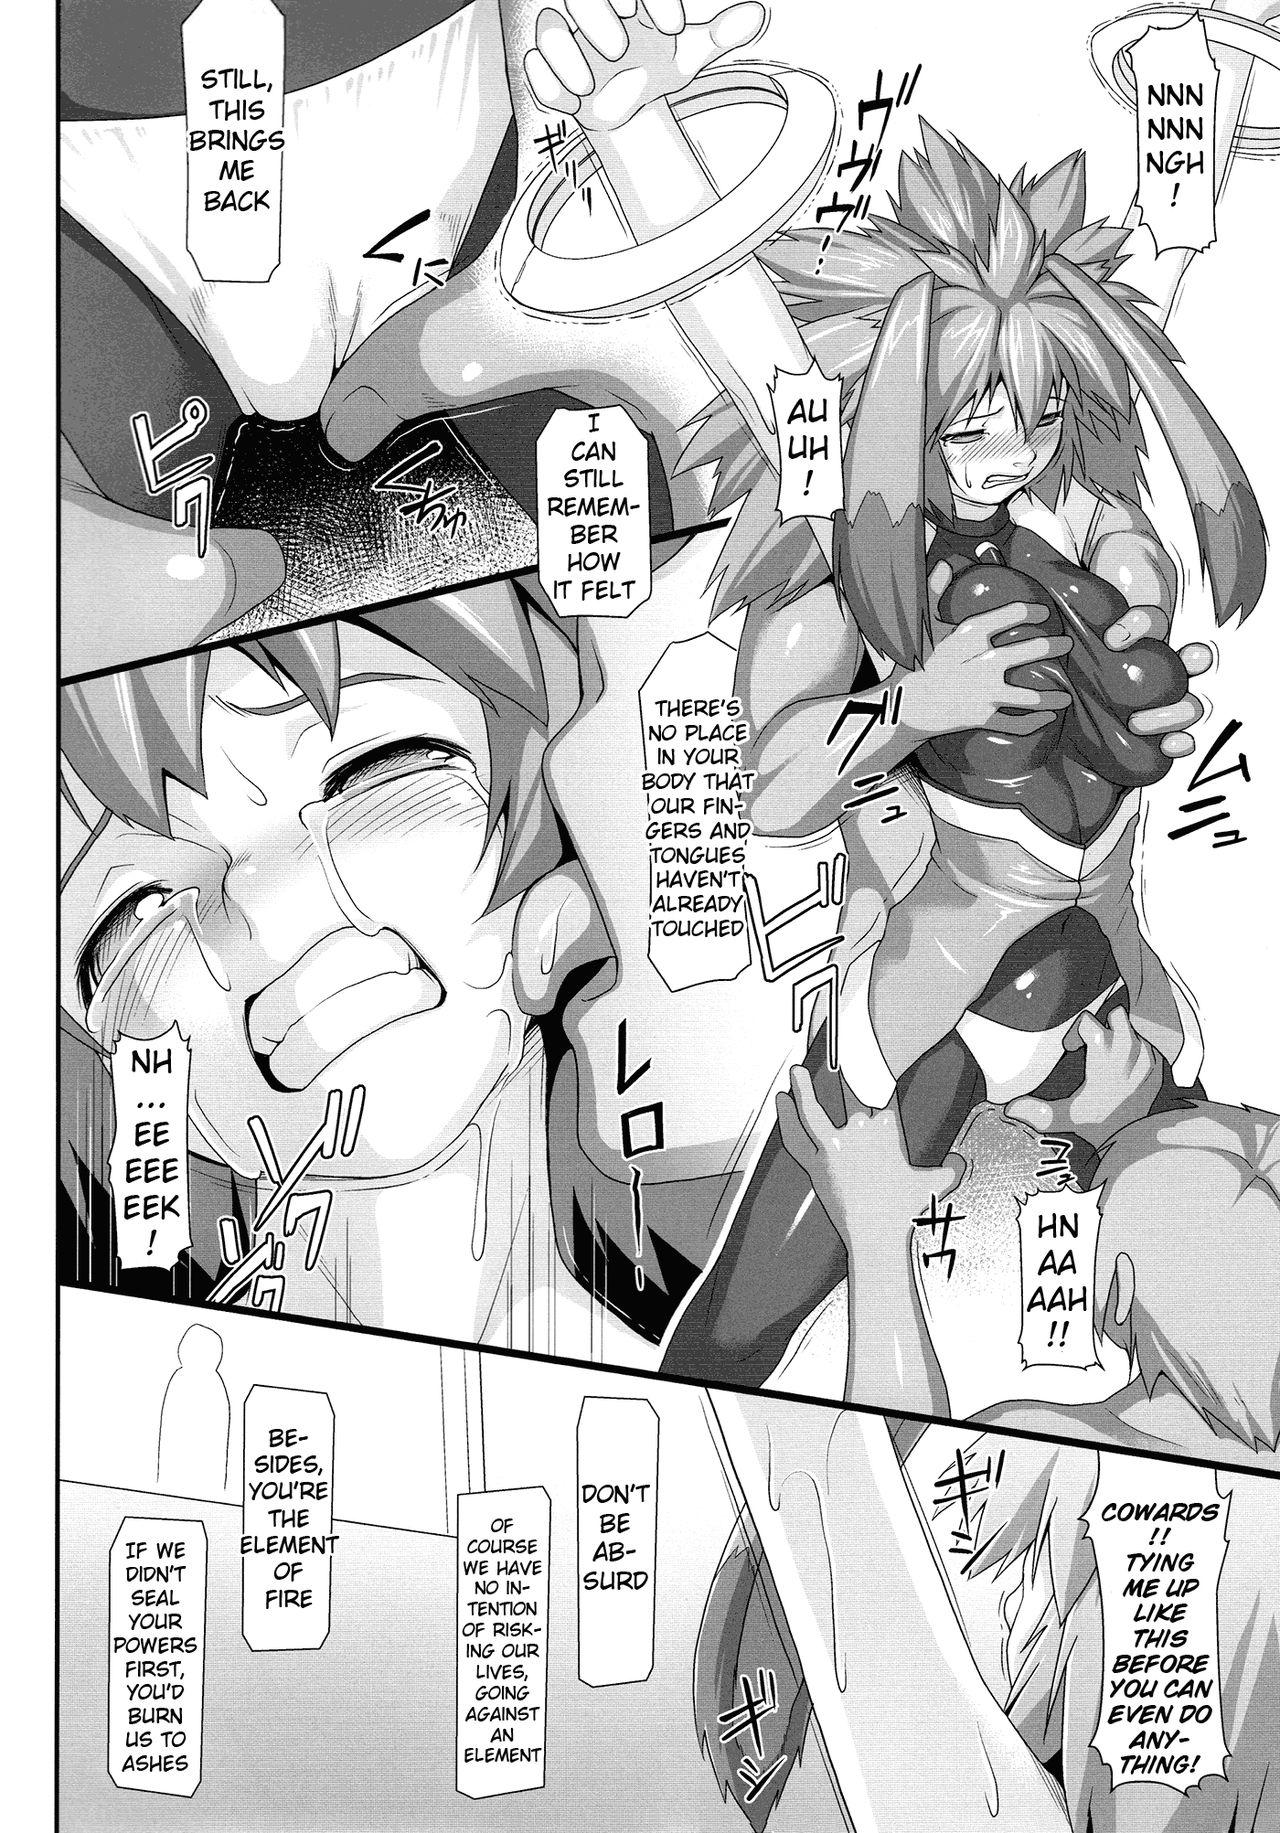 Japan Seraphic Gate 4 - Xenogears Class - Page 5